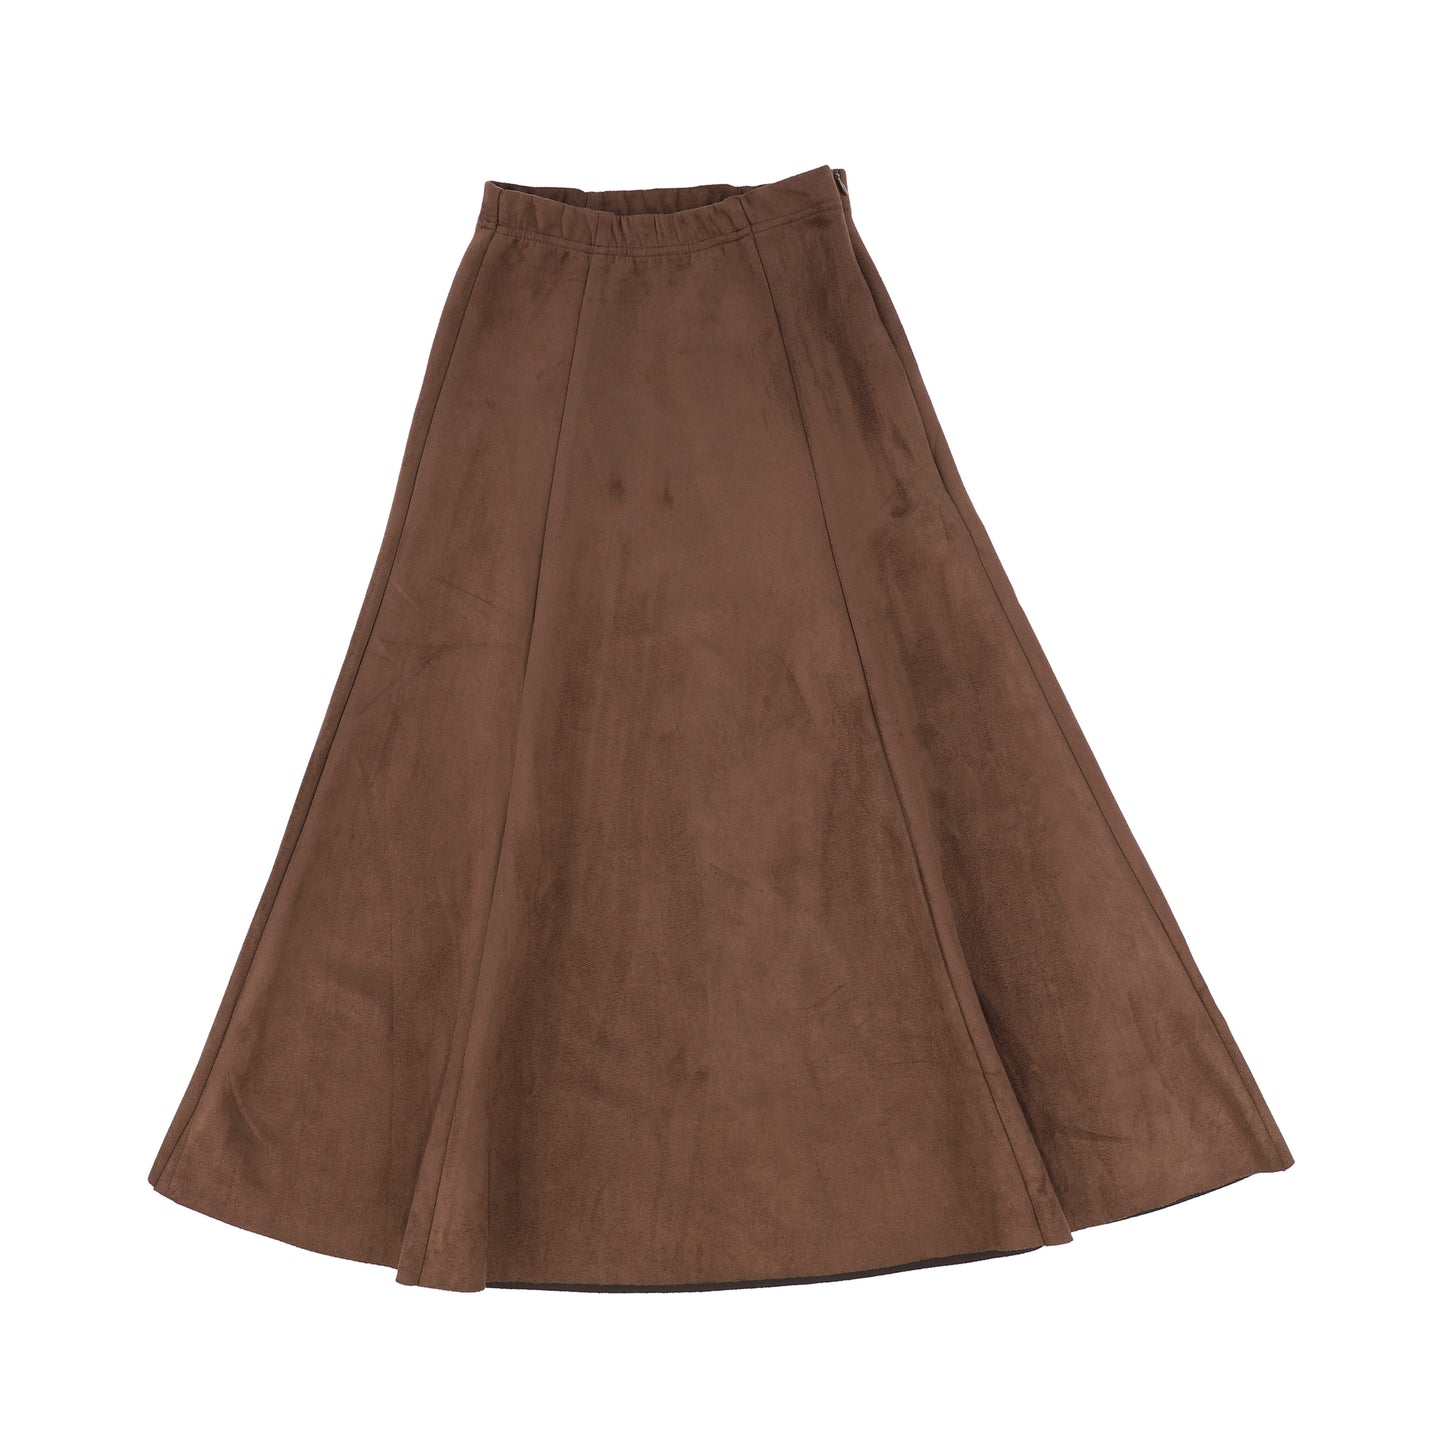 BAMBOO BROWN SUEDE PANELED SKIRT [Final Sale]